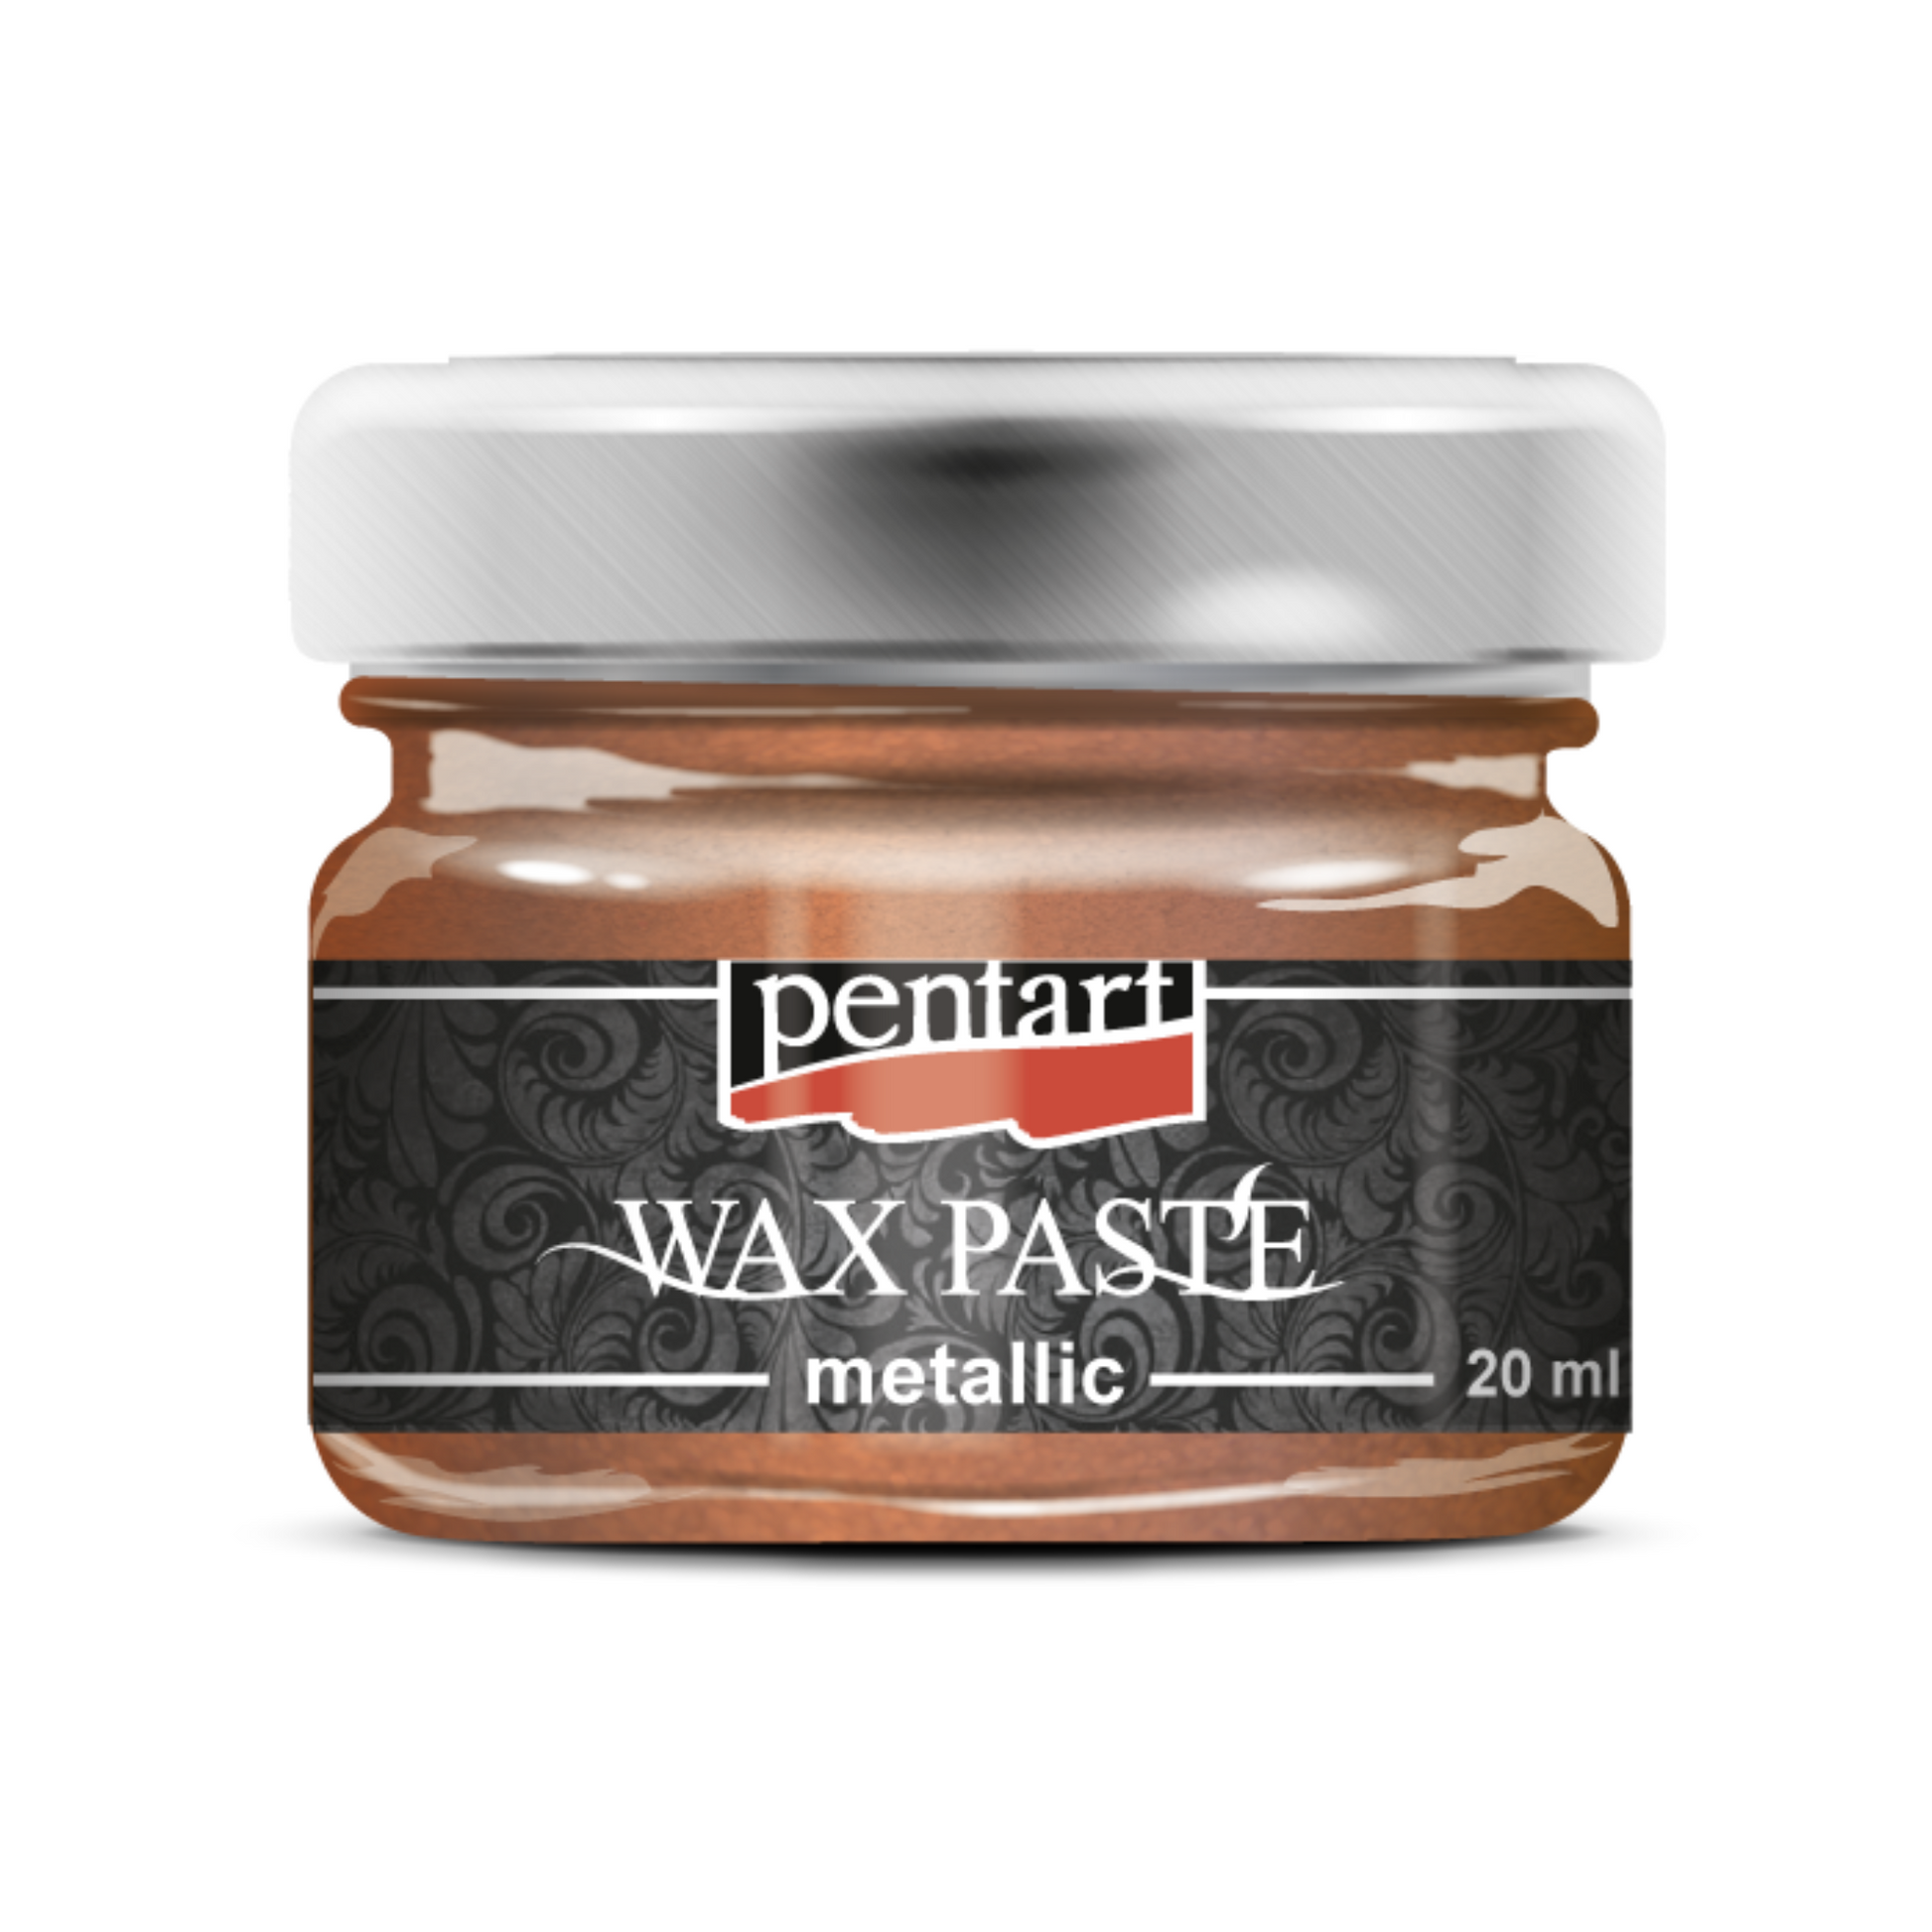 Wax Paste - Metallic Copper 20 ml by Pentart available at Milton's Daughter